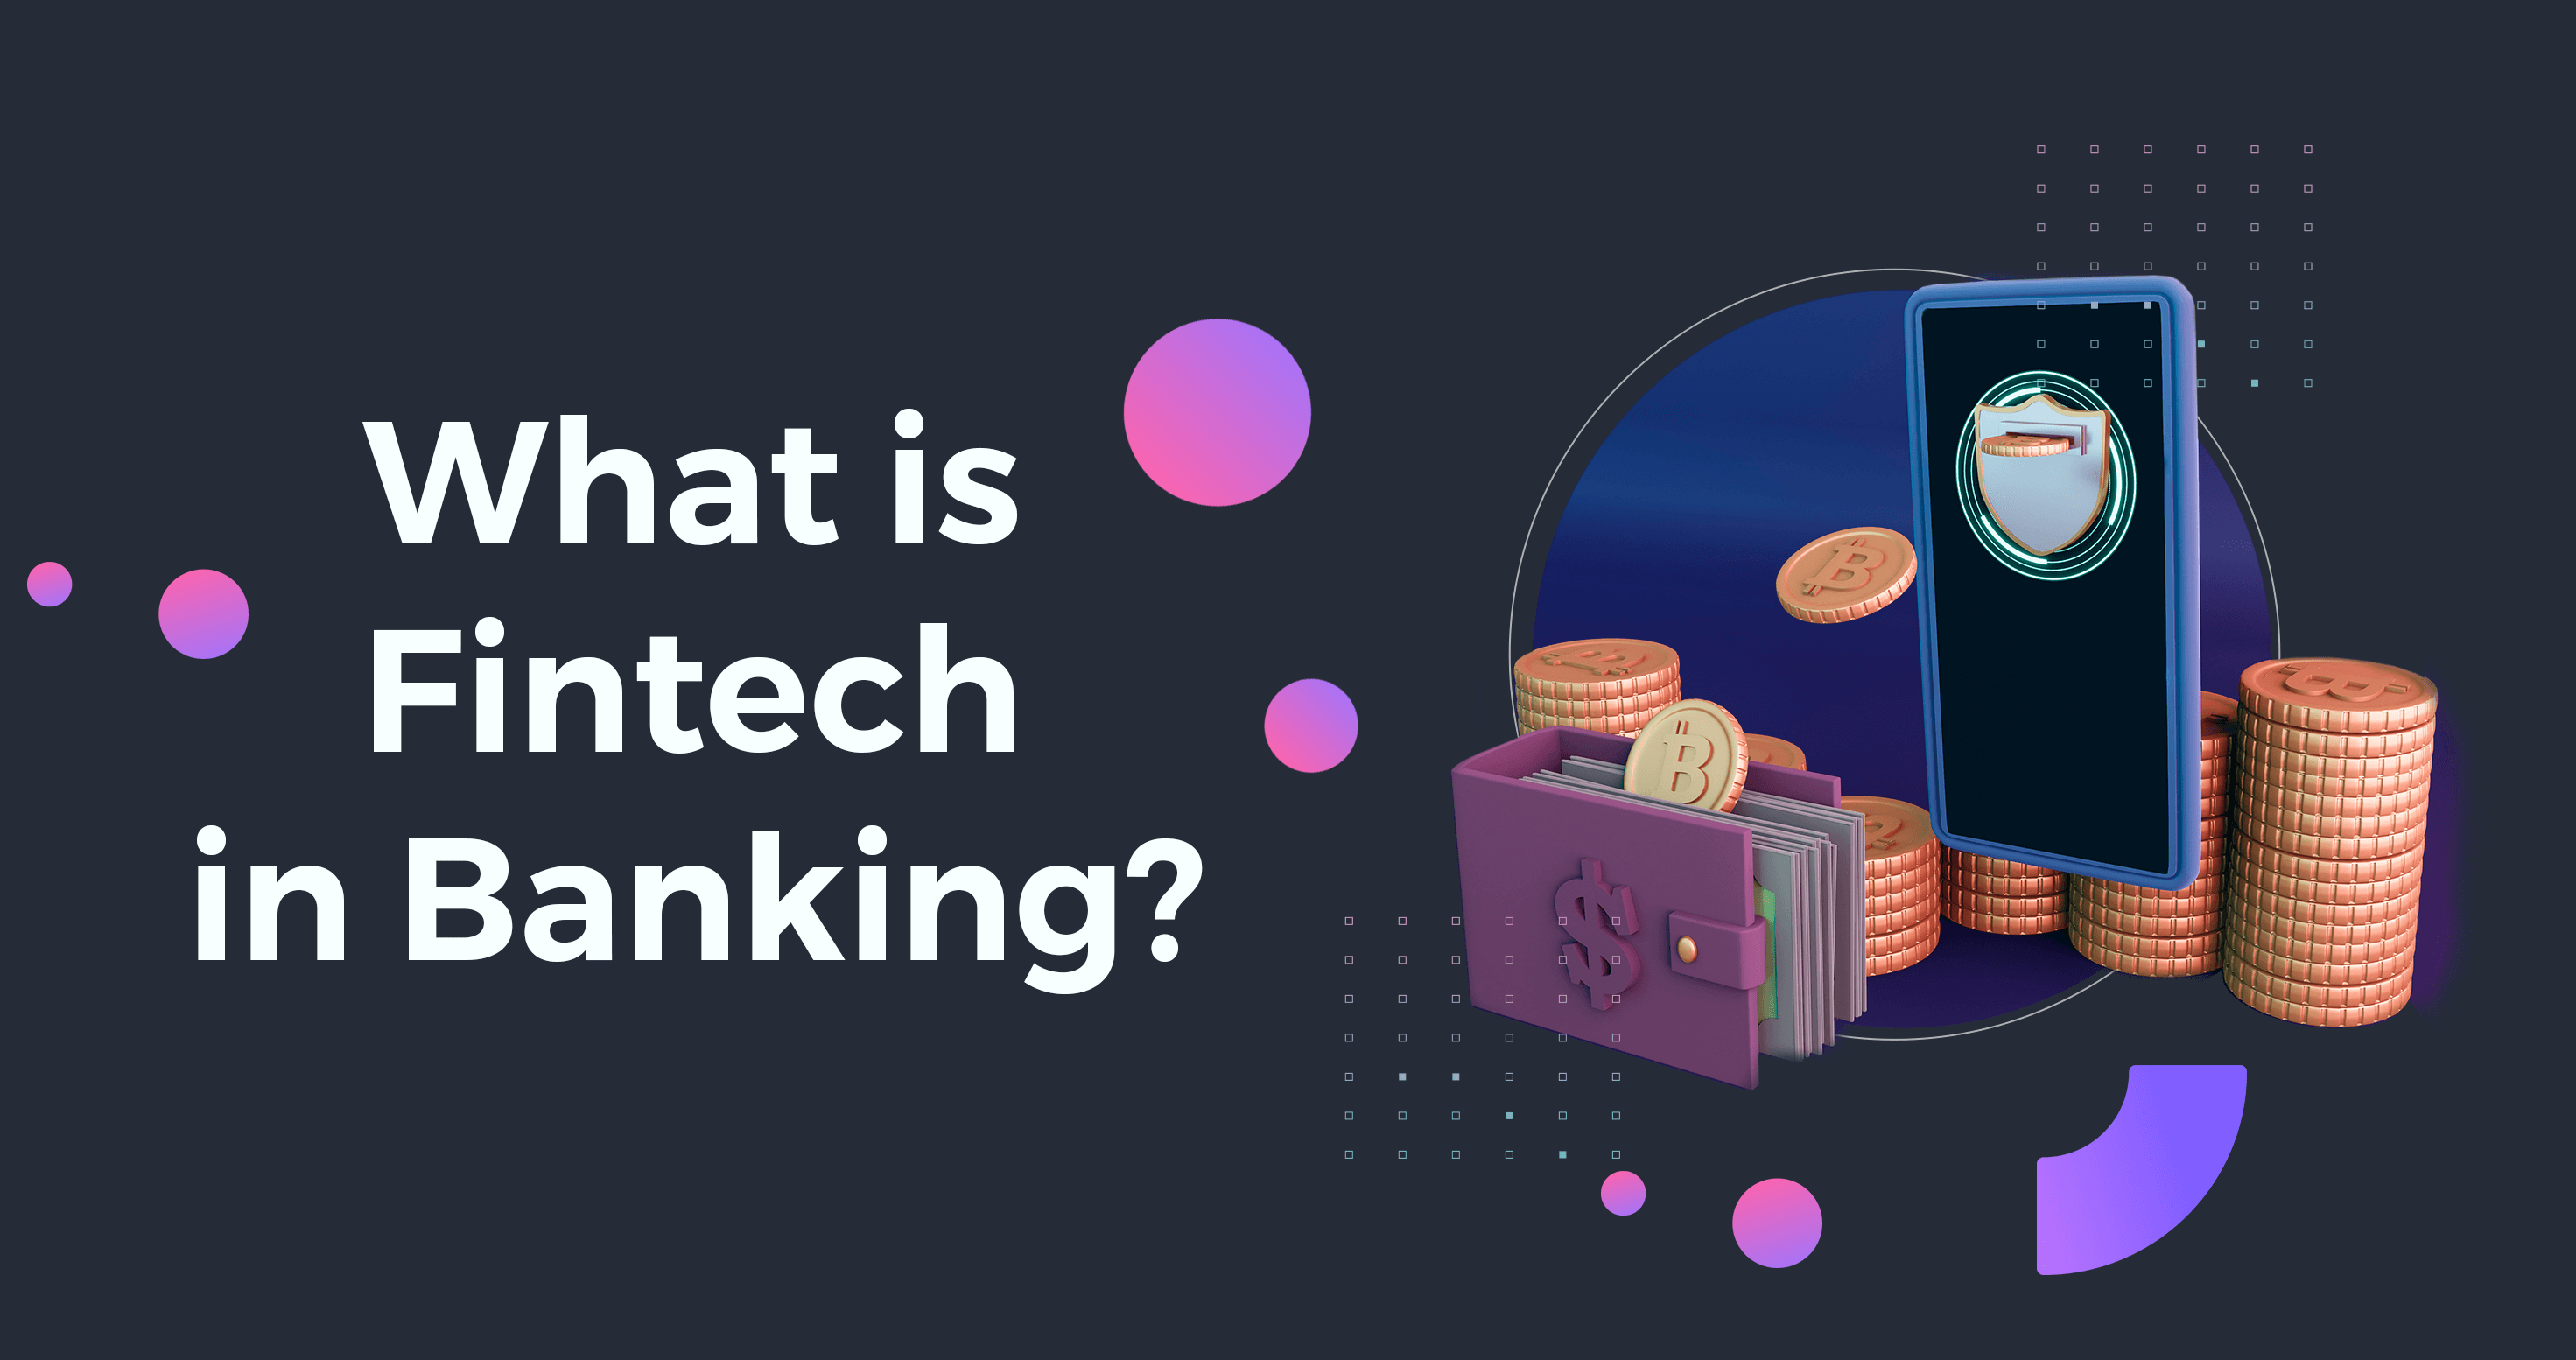 What is Fintech in Banking